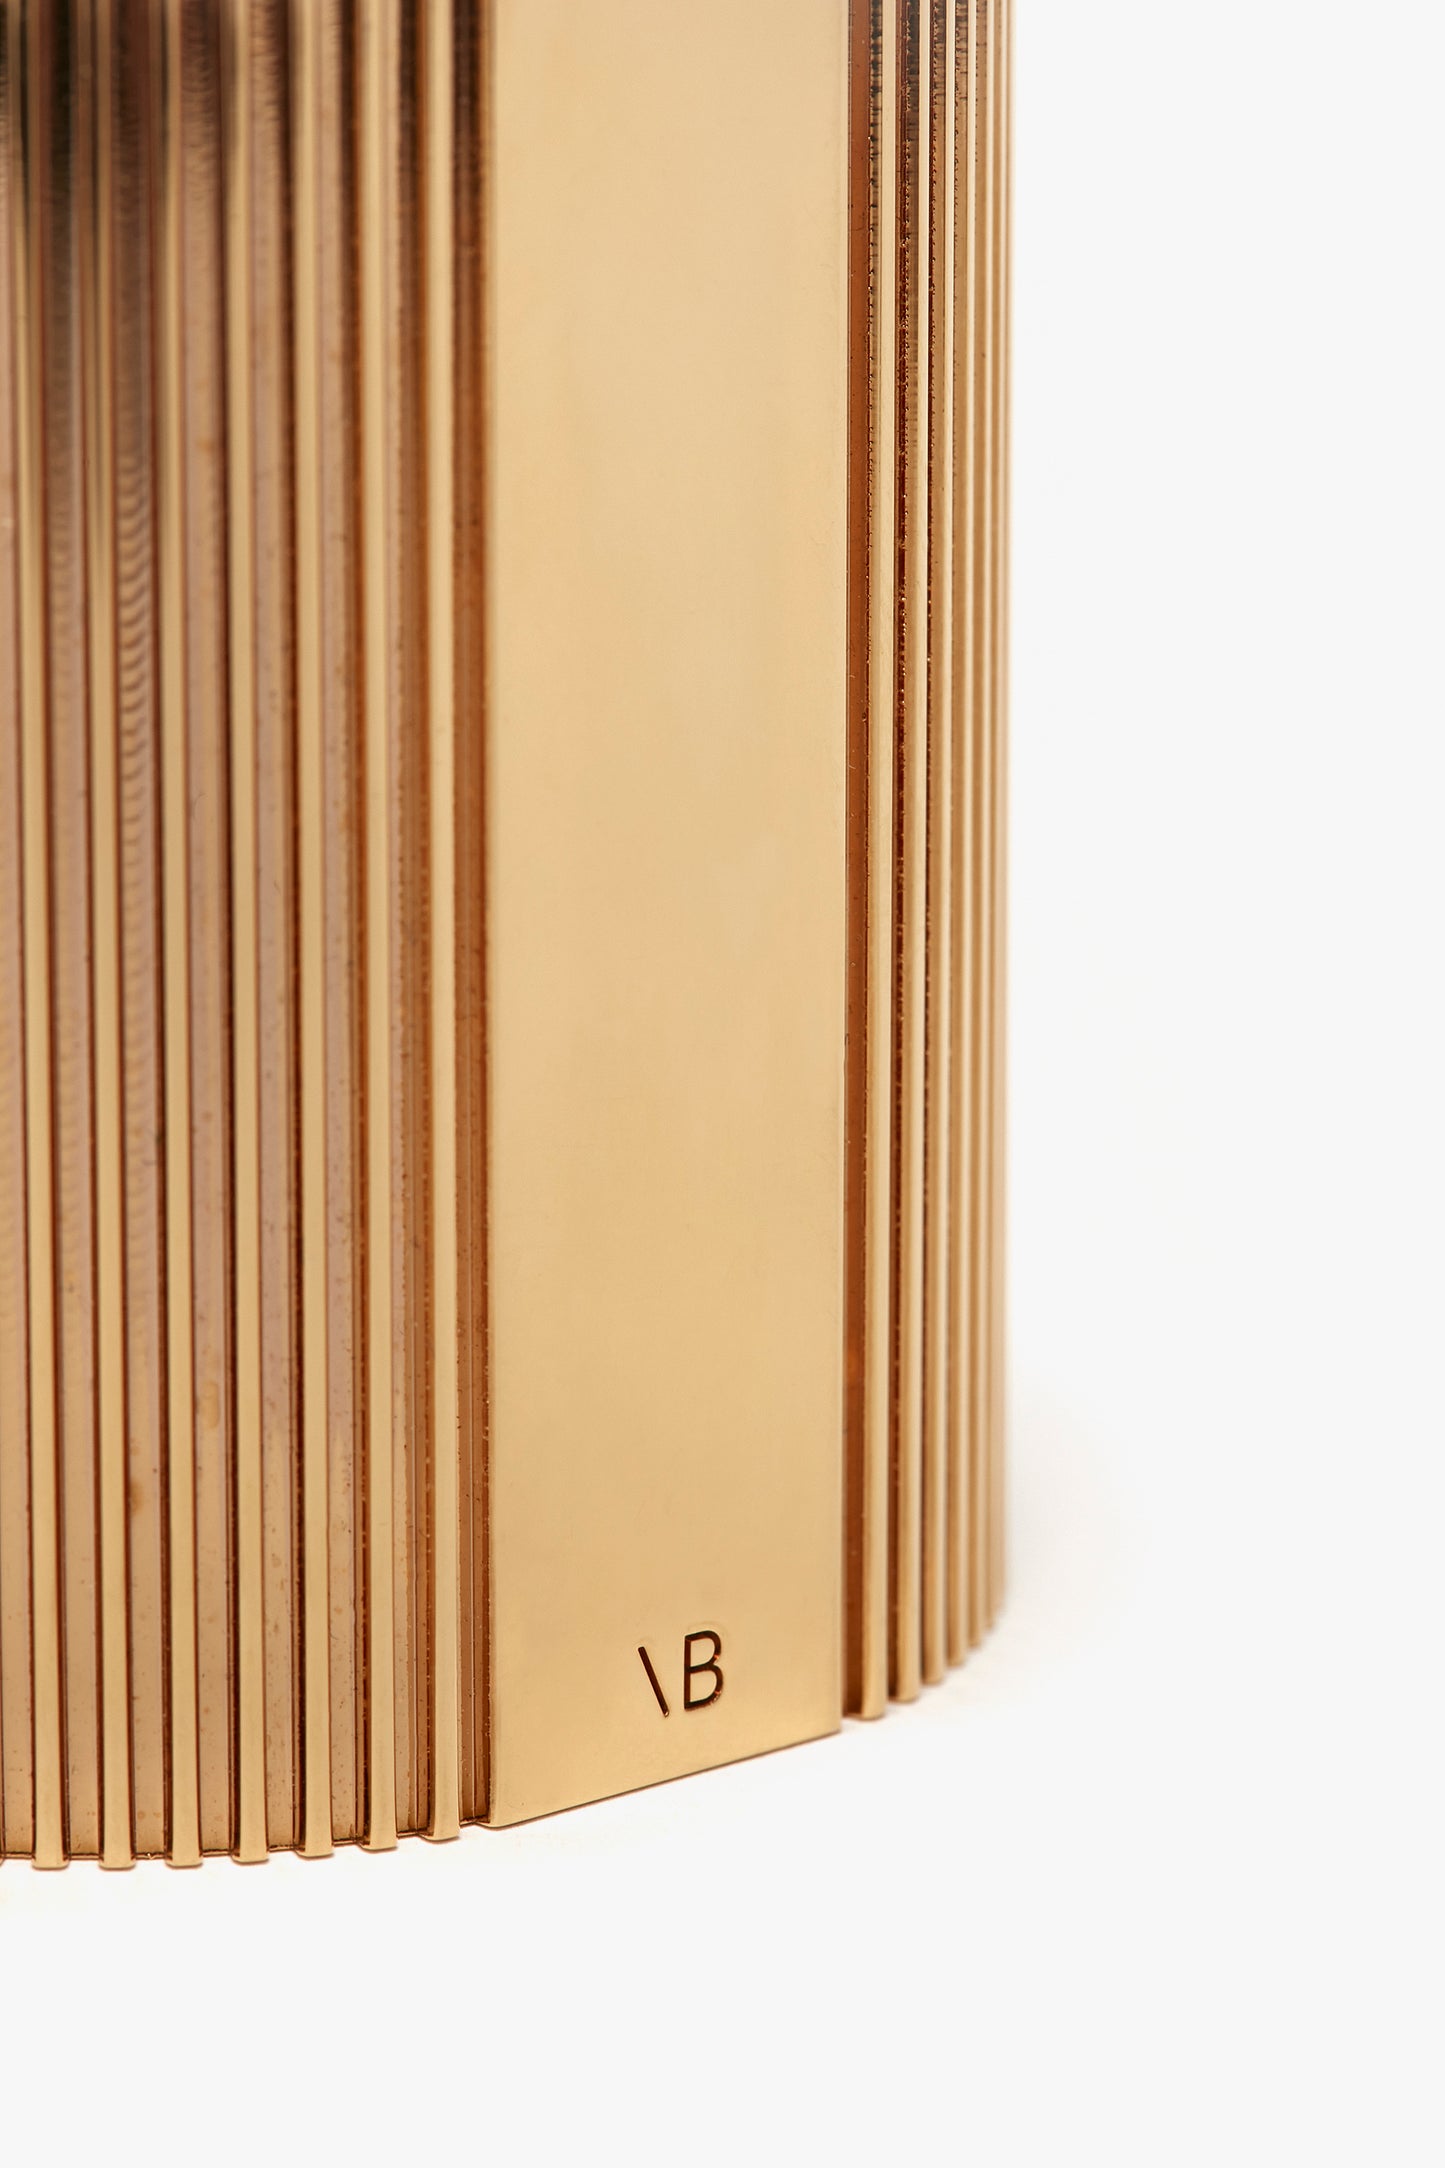 Close-up image of the side view of an open book with beige pages, focusing on the textured edges and a visible 'nb' imprint on the Victoria Beckham Exclusive Perfume Cuff In Gold back cover.